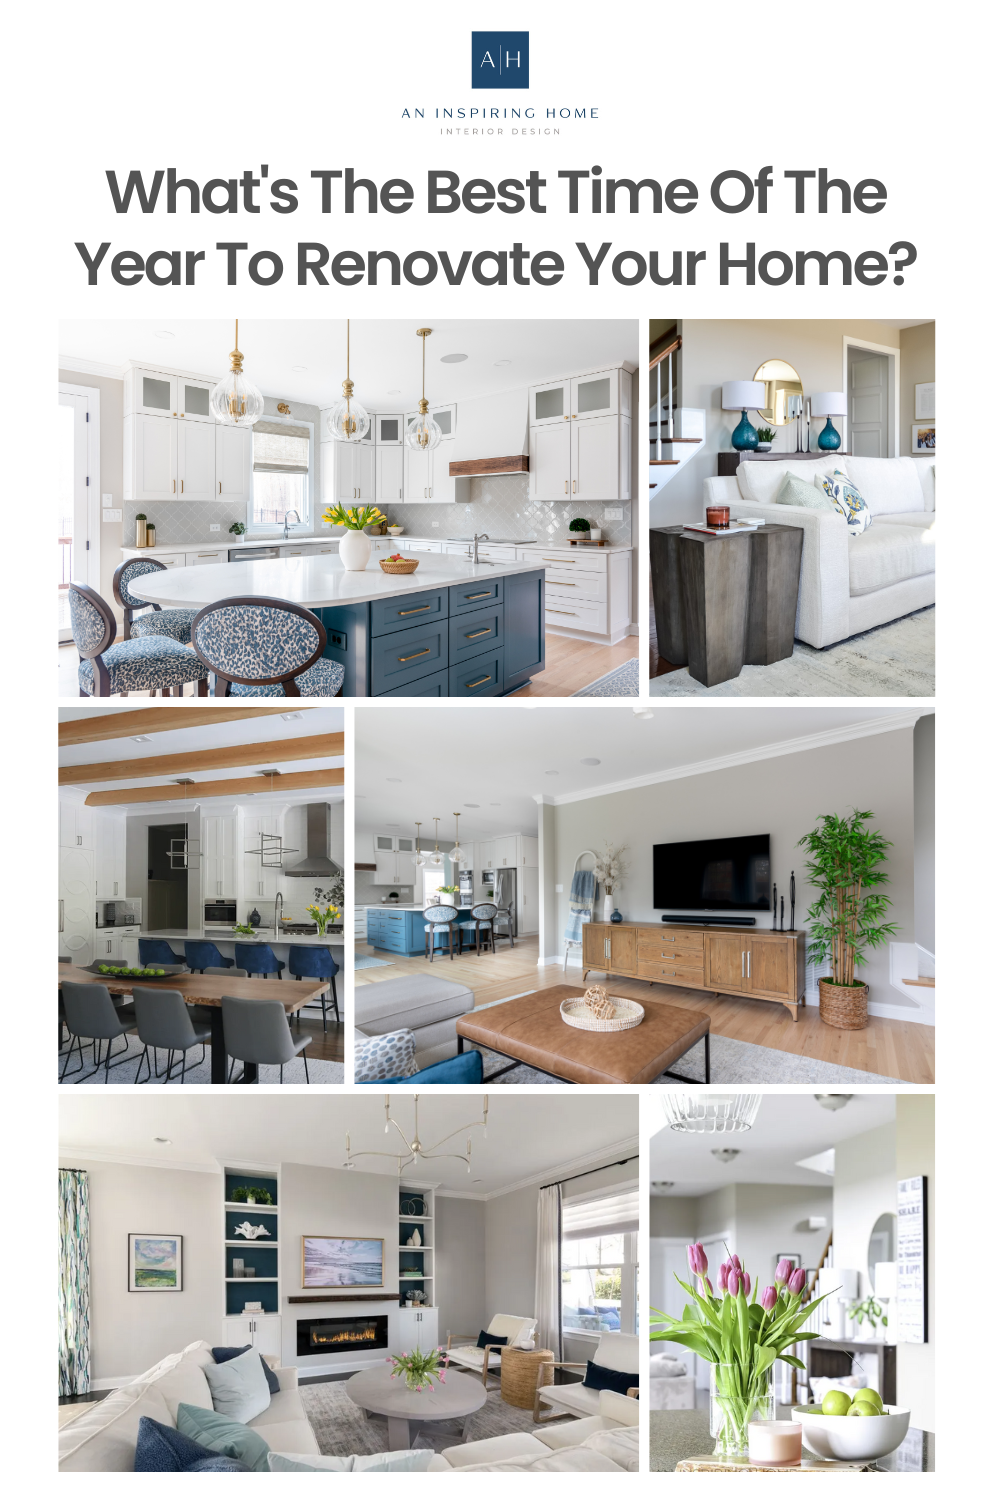 What's The Best Time Of The Year To Renovate Your Home?